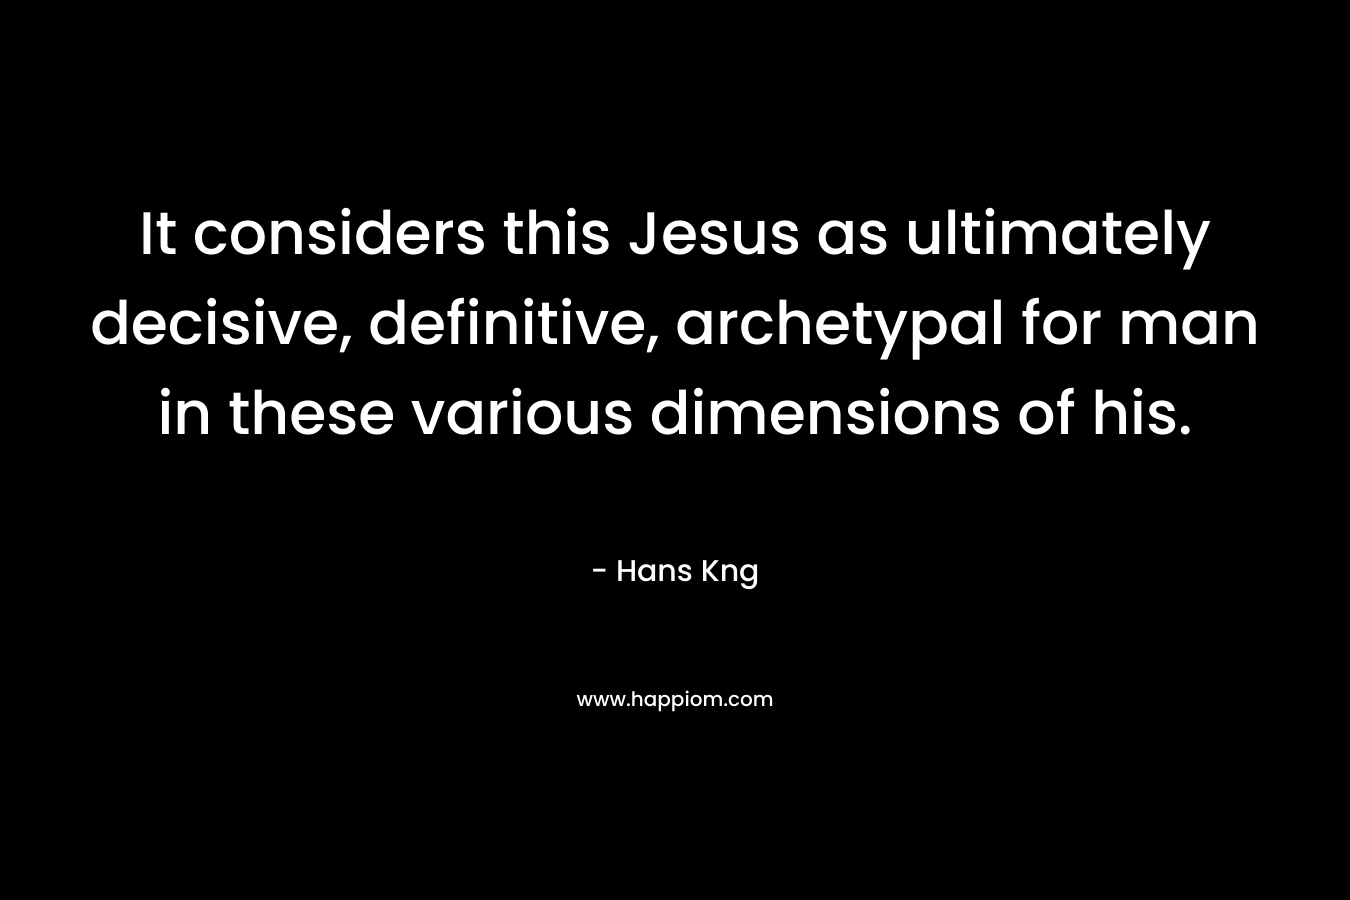 It considers this Jesus as ultimately decisive, definitive, archetypal for man in these various dimensions of his. – Hans Kng